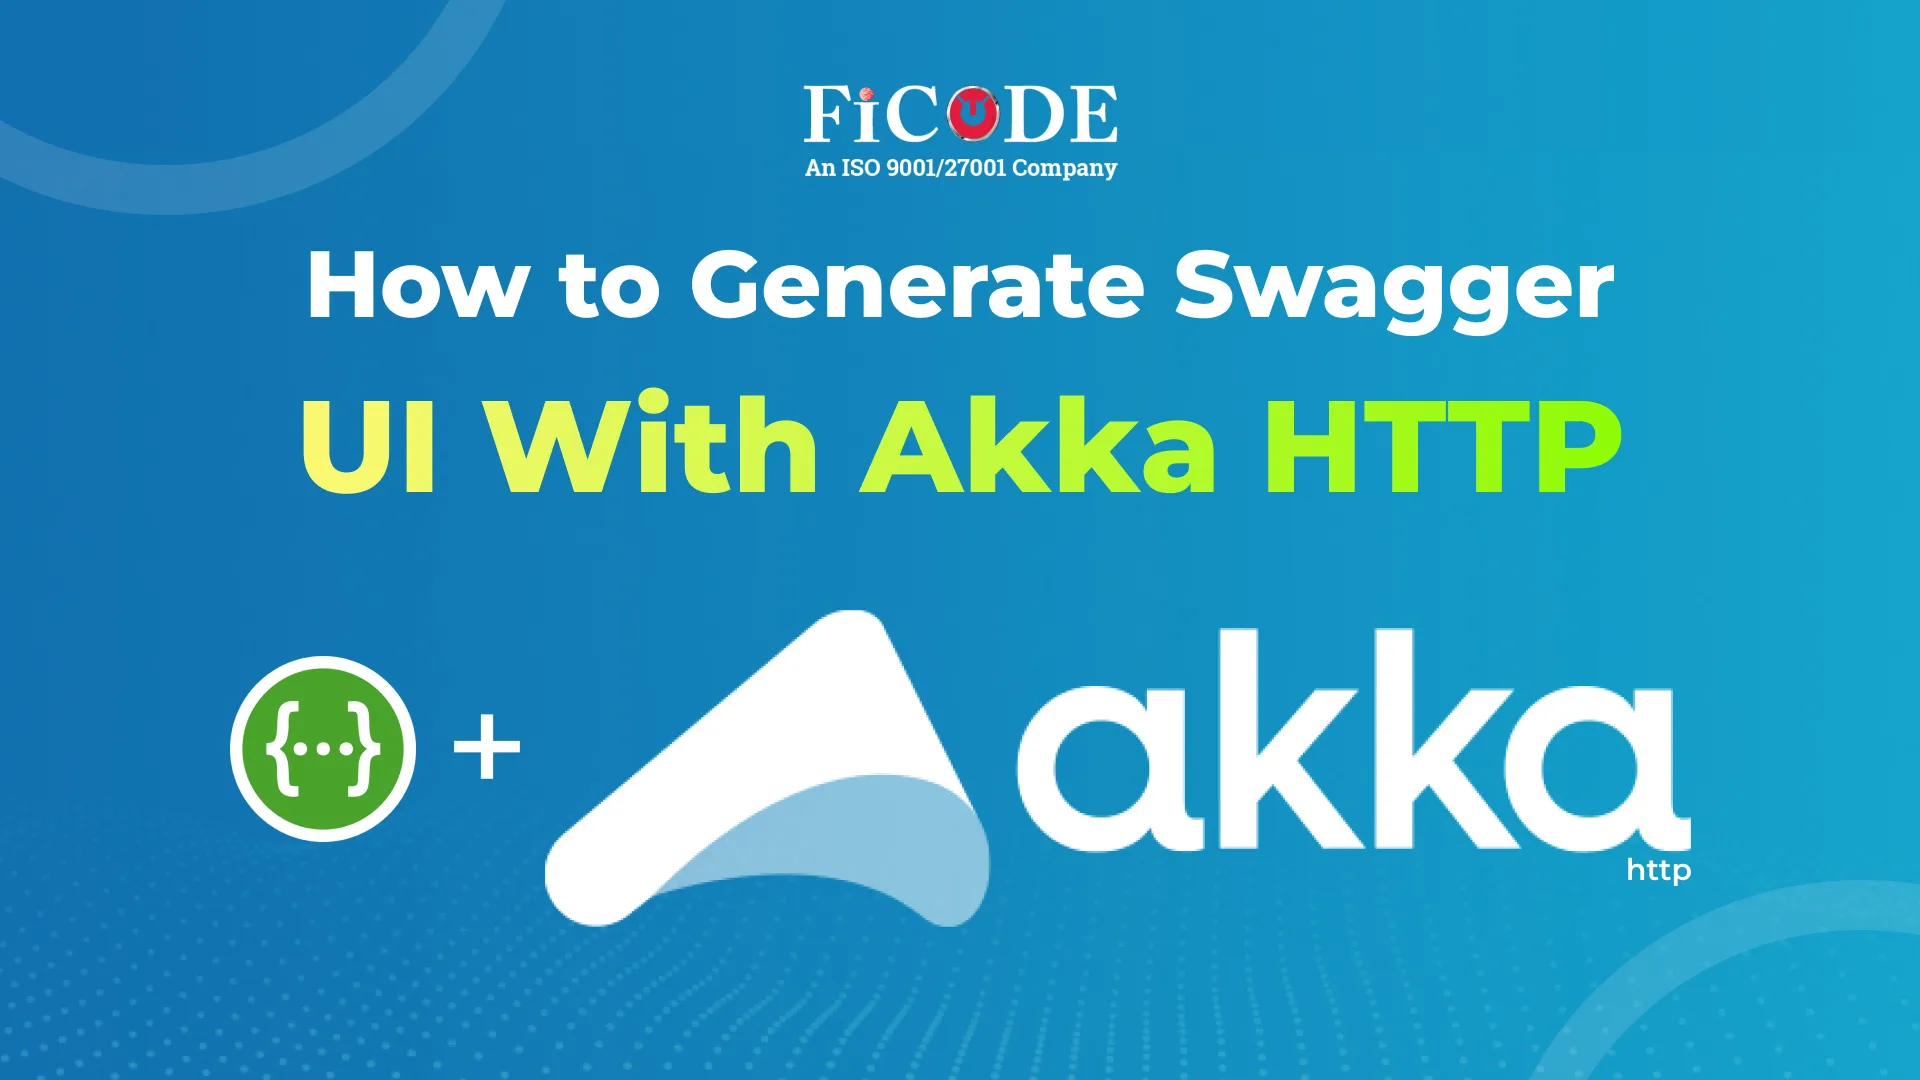 How to Generate Swagger UI with Akka HTTP